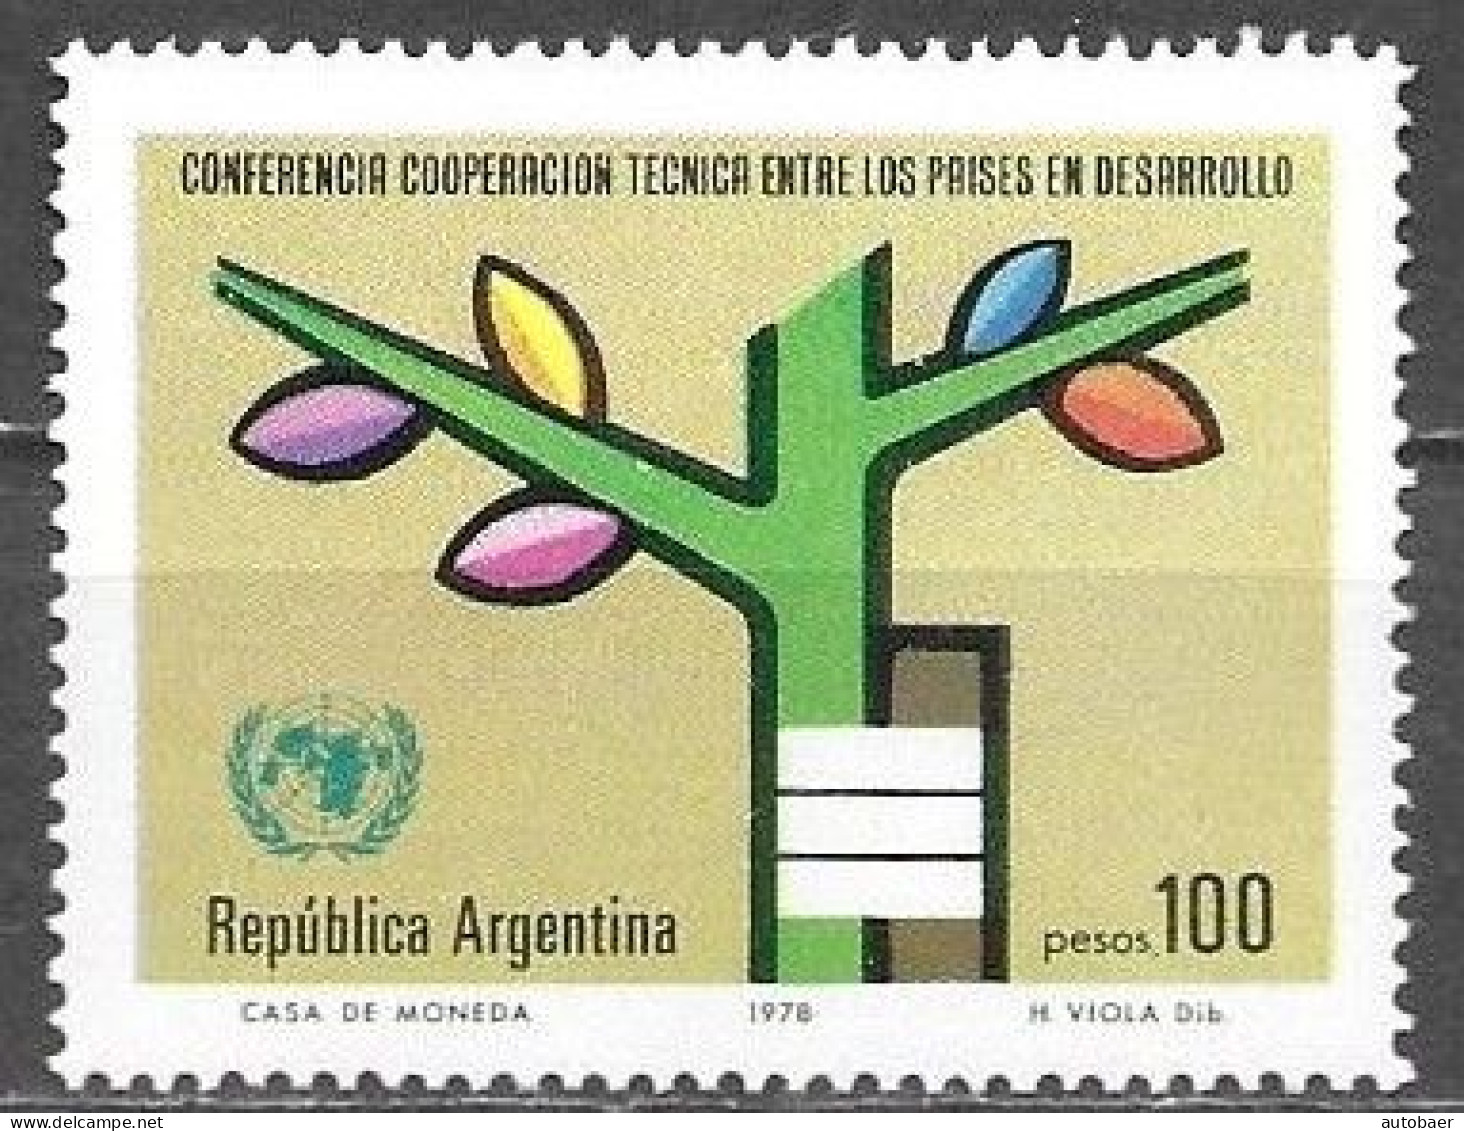 Argentina 1978 Conferencia Cooperacion Conference Cooperation Developing Countries Mi. 1353 MNH Postfrisch Neuf ** - Neufs